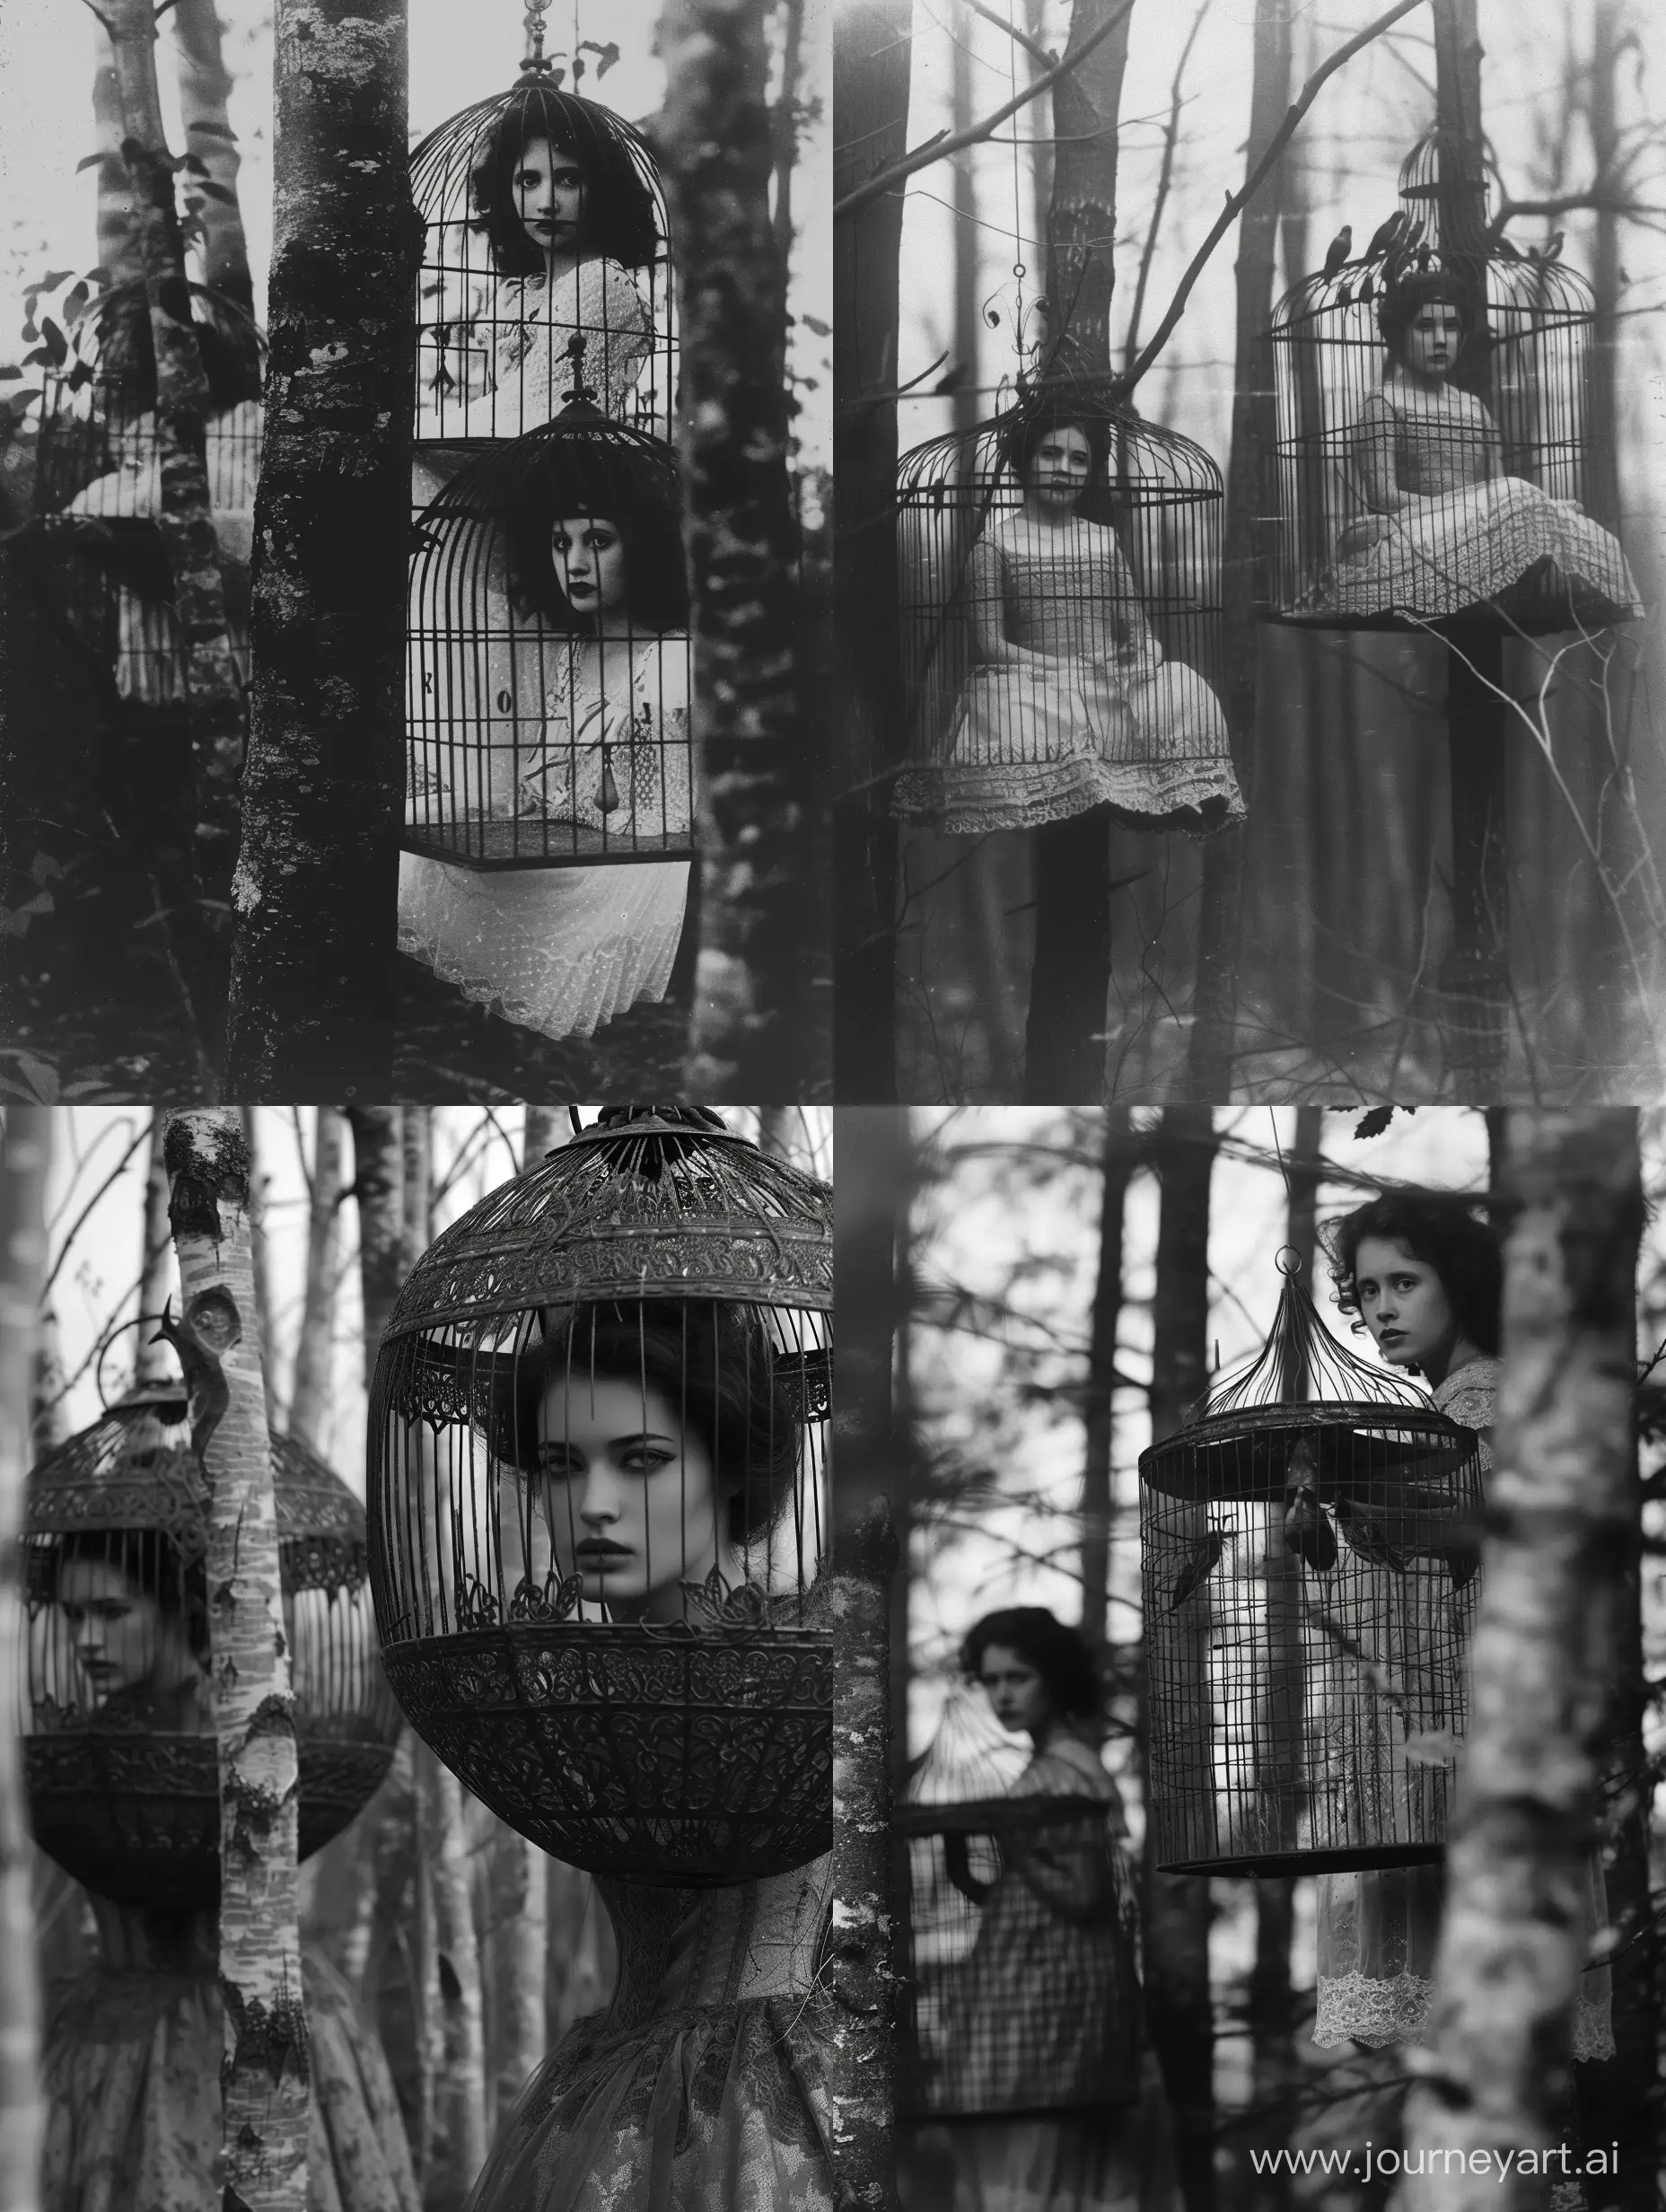 grayscale photo that evokes folk horror, beautiful women wearing vintage dresses inside large human size antique bird cages hanging in trees in a mysterious forest, detailed faces, the_ritual, creepypasta, folk horror, dark aesthetic, dark folk, dark magic, witch core